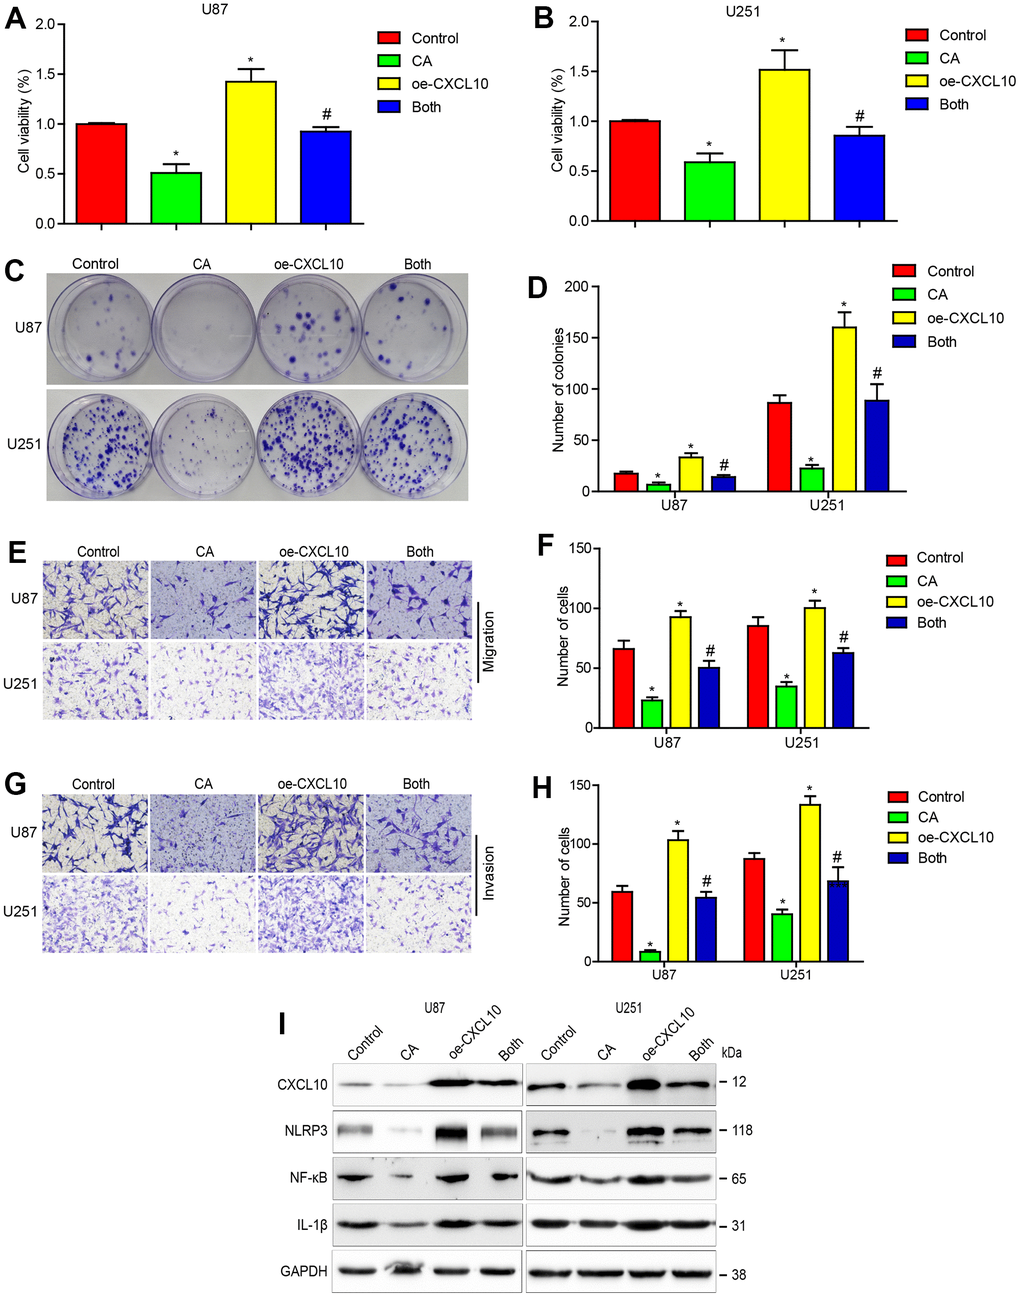 CXCL10 overexpression reduces the effects of calycosin on cells proliferation, migration, invasion and CXCL10 signaling in GBM. (A–D) Effect of CXCL10 overexpression on calycosin in U87 and U251 cell proliferation. (E–H) Effect of CXCL10 overexpression on calycosin in U87 and U251 cell migration and invasion. (I) Overexpressing CXCL10 rescues calycosin-induced CXCL10, NLRP3, NF-κB and IL-1β downregulation. Control: GFP lentivirus transfection; CA: GFP lentivirus transfection + 200μM calycosin; oe-CXCL10: lentivirus transfection CXCL10; Both: lentivirus transfection CXCL10 + 200μM calycosin. *P #P 